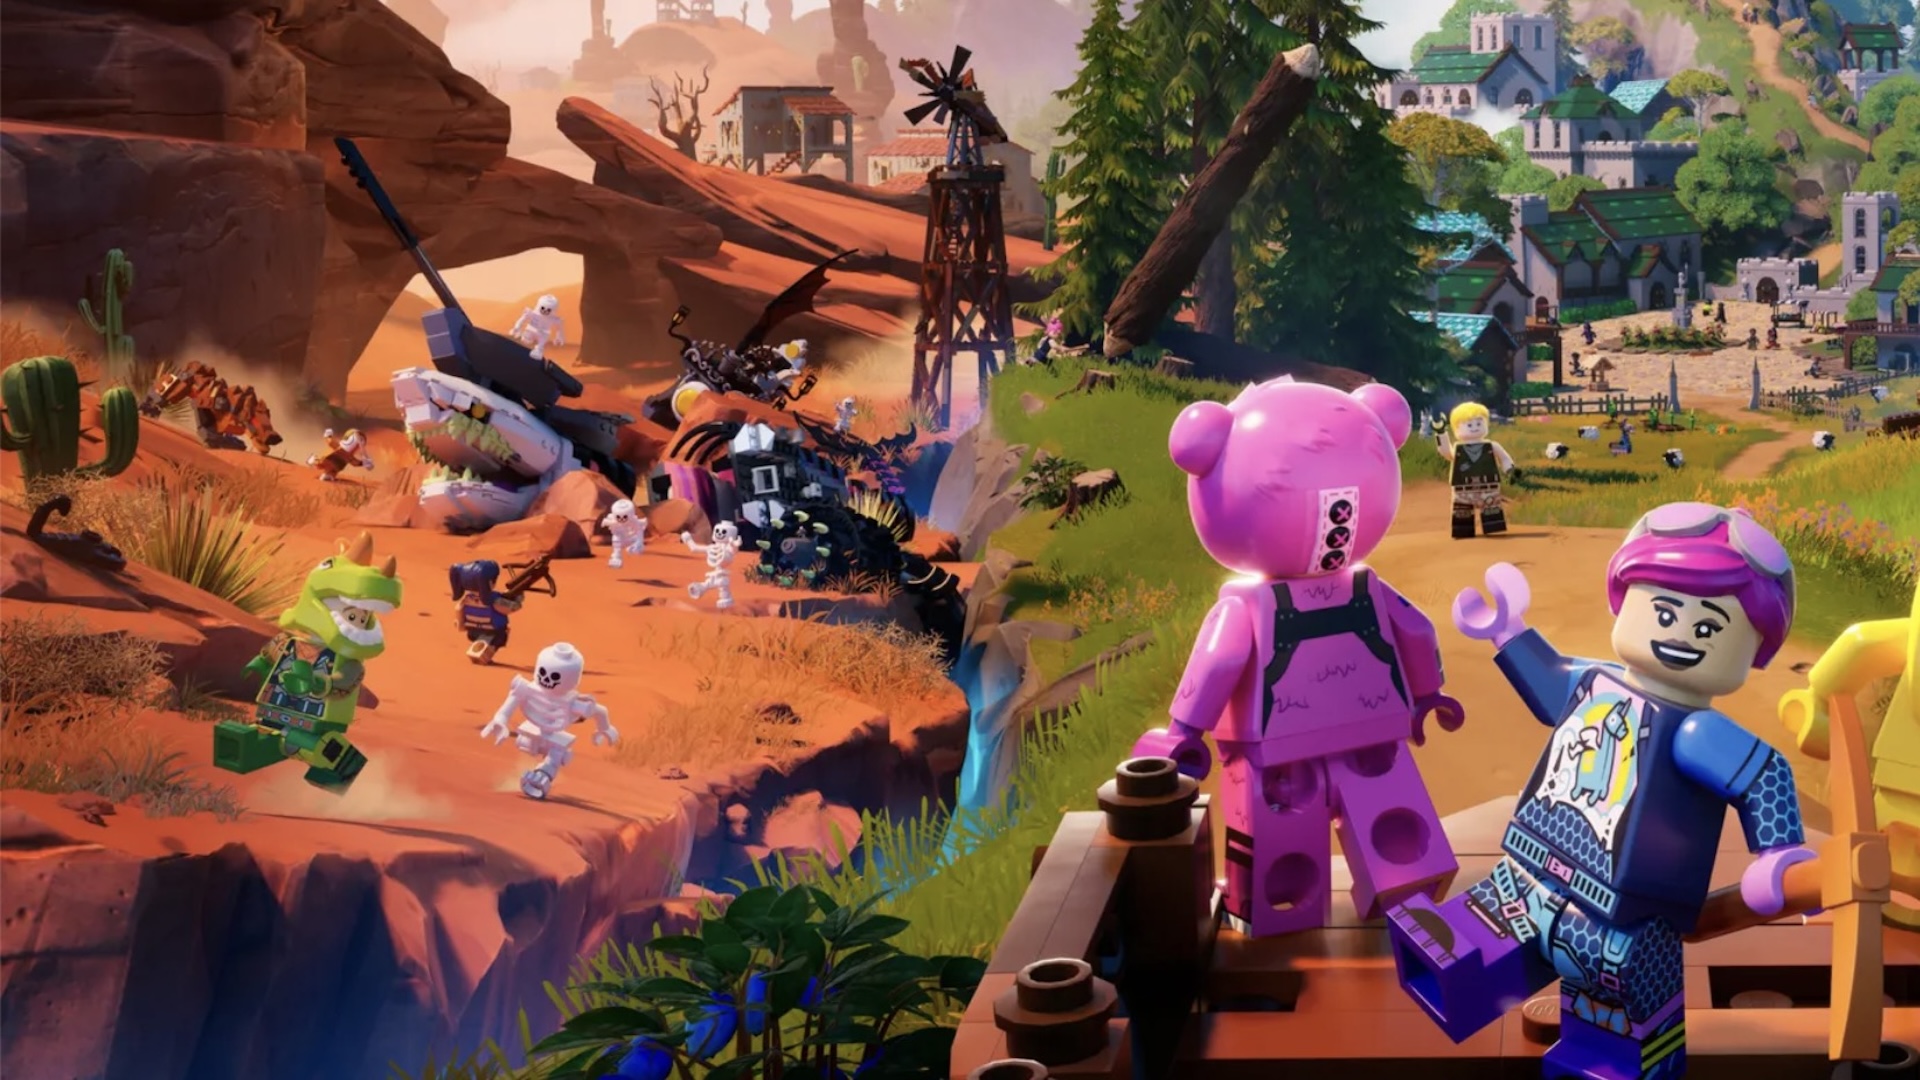 A look at Lego Fortnite's open-world